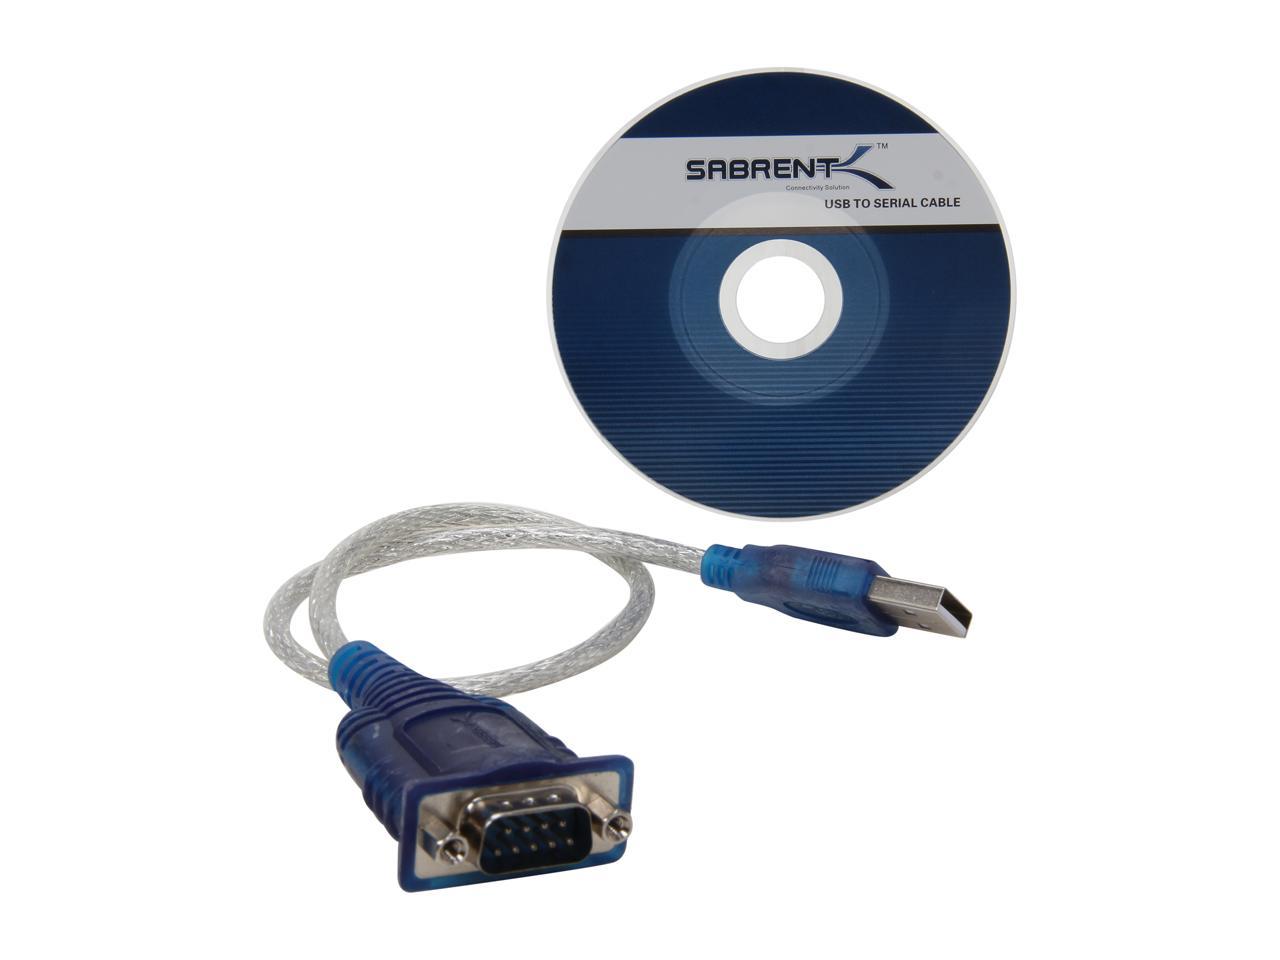 SABRENT SBT-USC1M DRIVERS FOR MAC